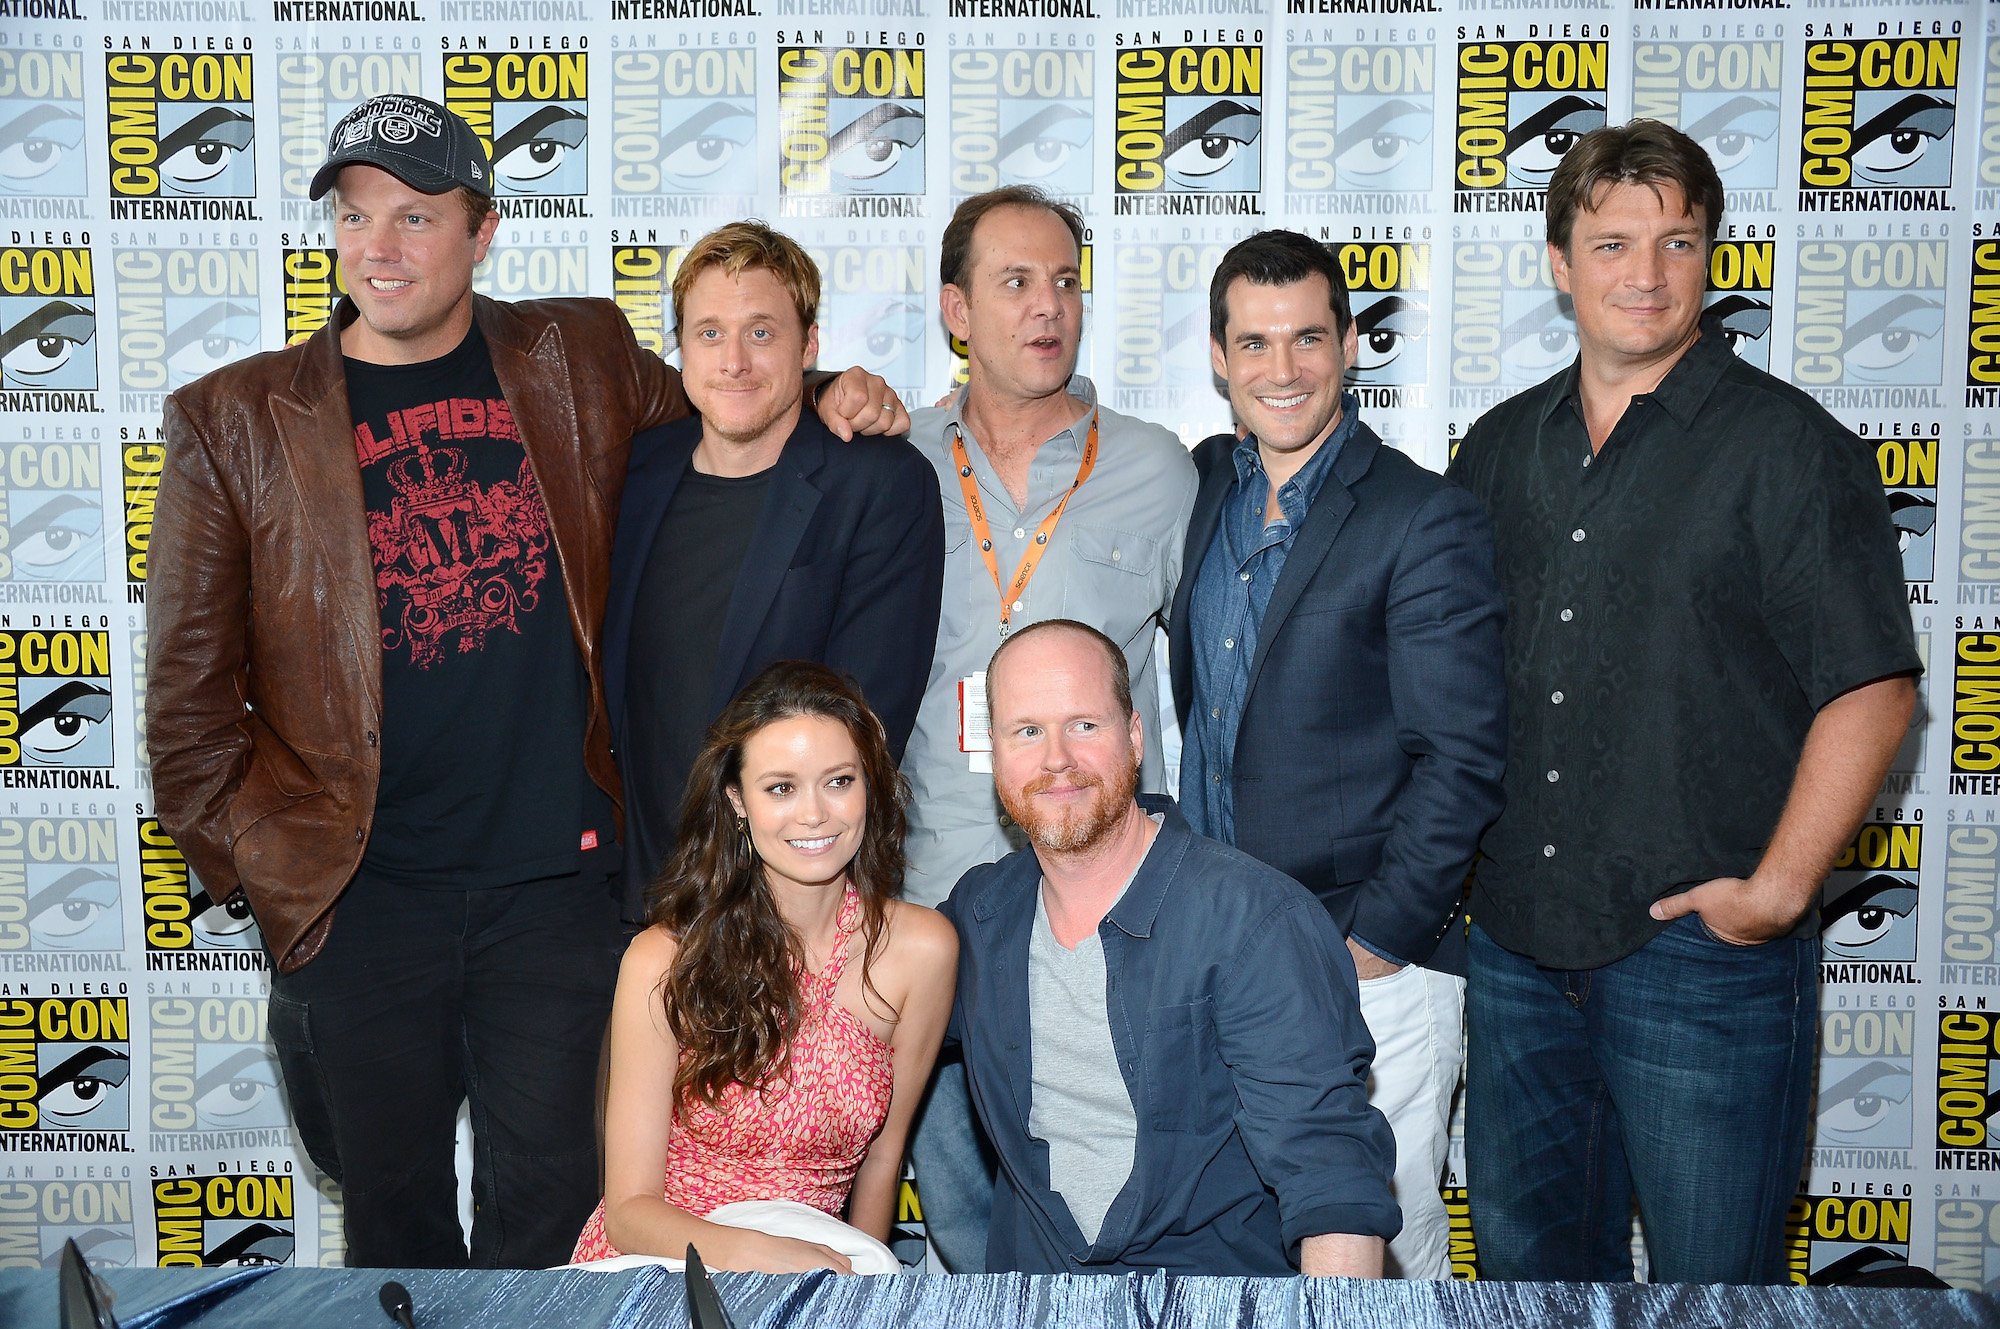 'Firefly' cast in front of a Comic Con background